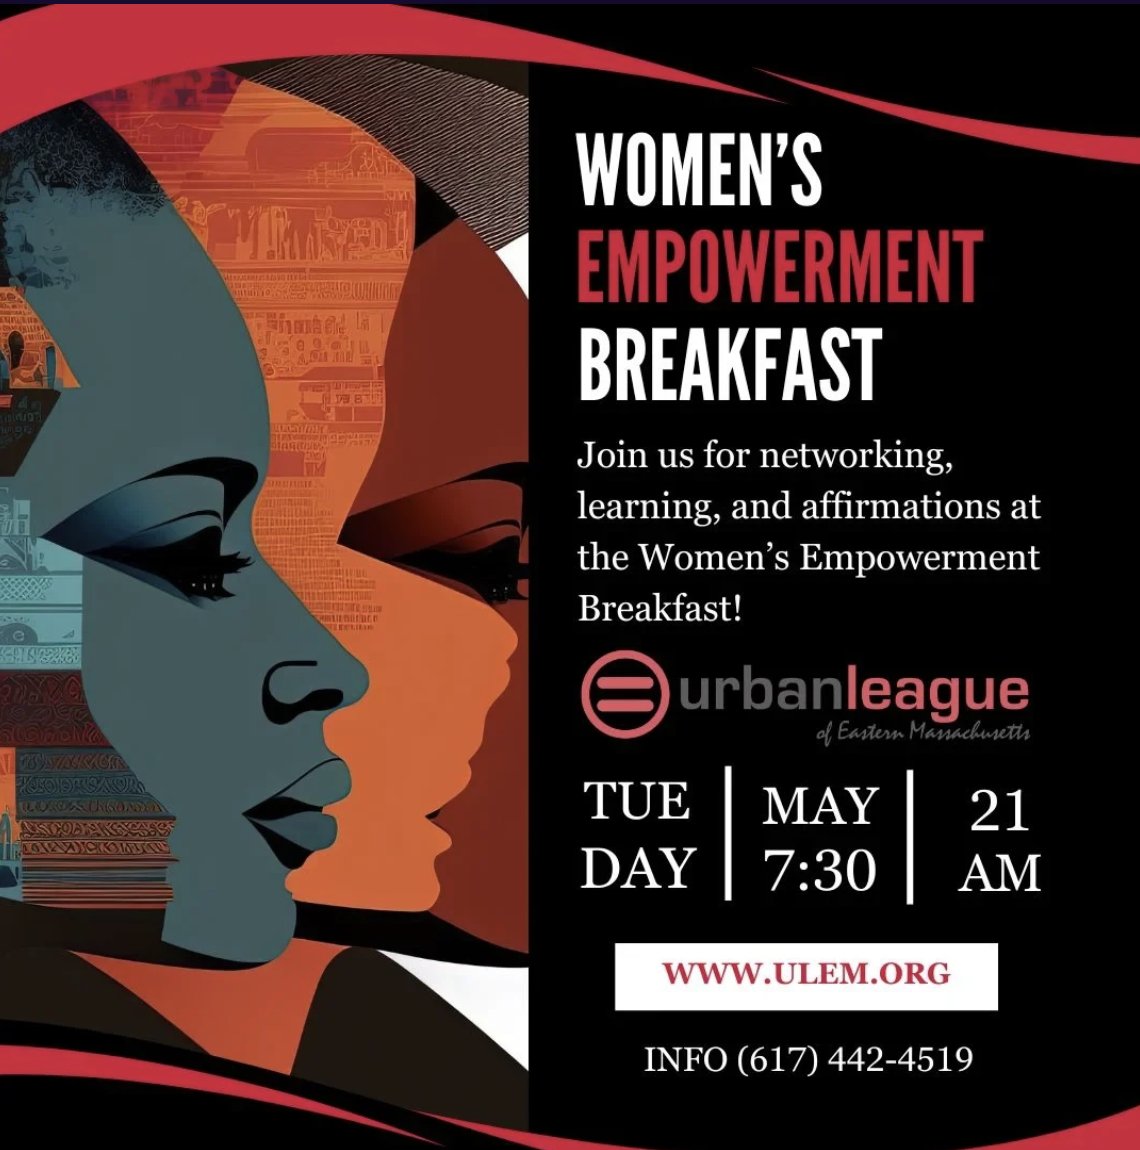 Join @malialazu on Tuesday May 21st 7:30am for the @theULEM Women's Empowerment Breakfast at @fenwaypark

RSVP Here:
eventnoire.com/events/ulem-web

#women #womenempowerment #urbanleague #DEI #diversity #equity #inclusion #excellence